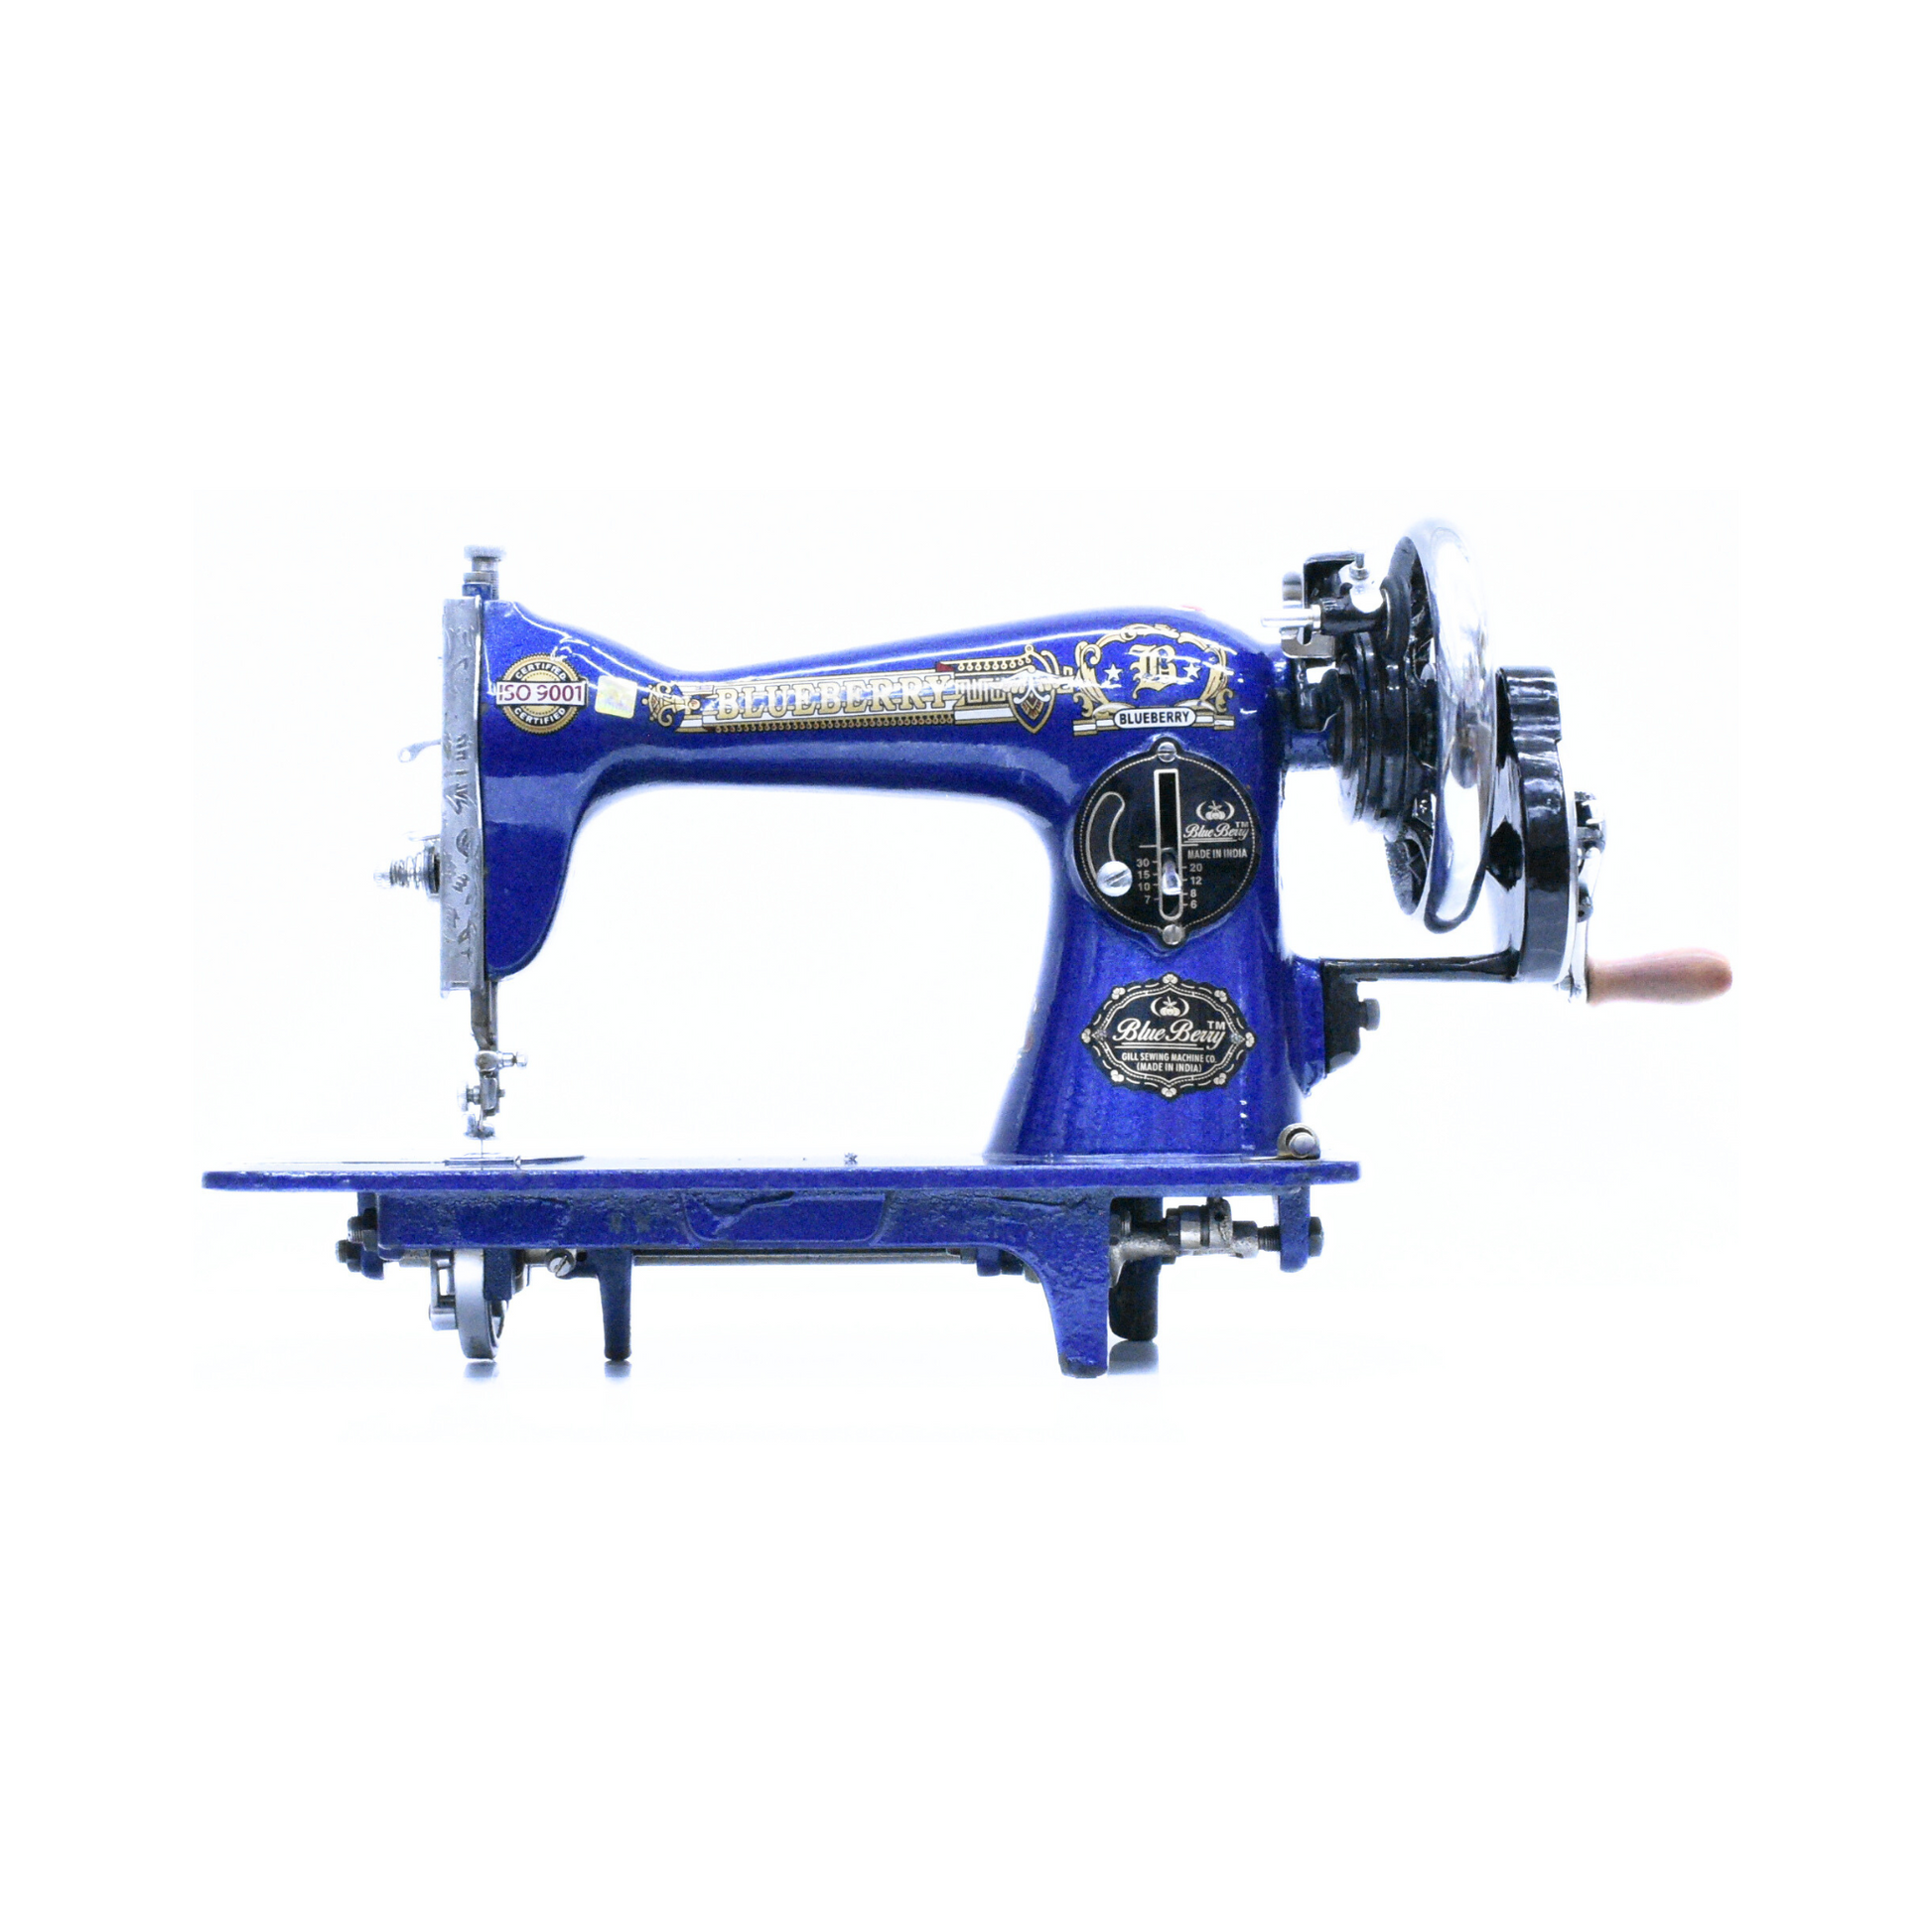 Blue berry - Vintage sewing machine - Blue - Front view